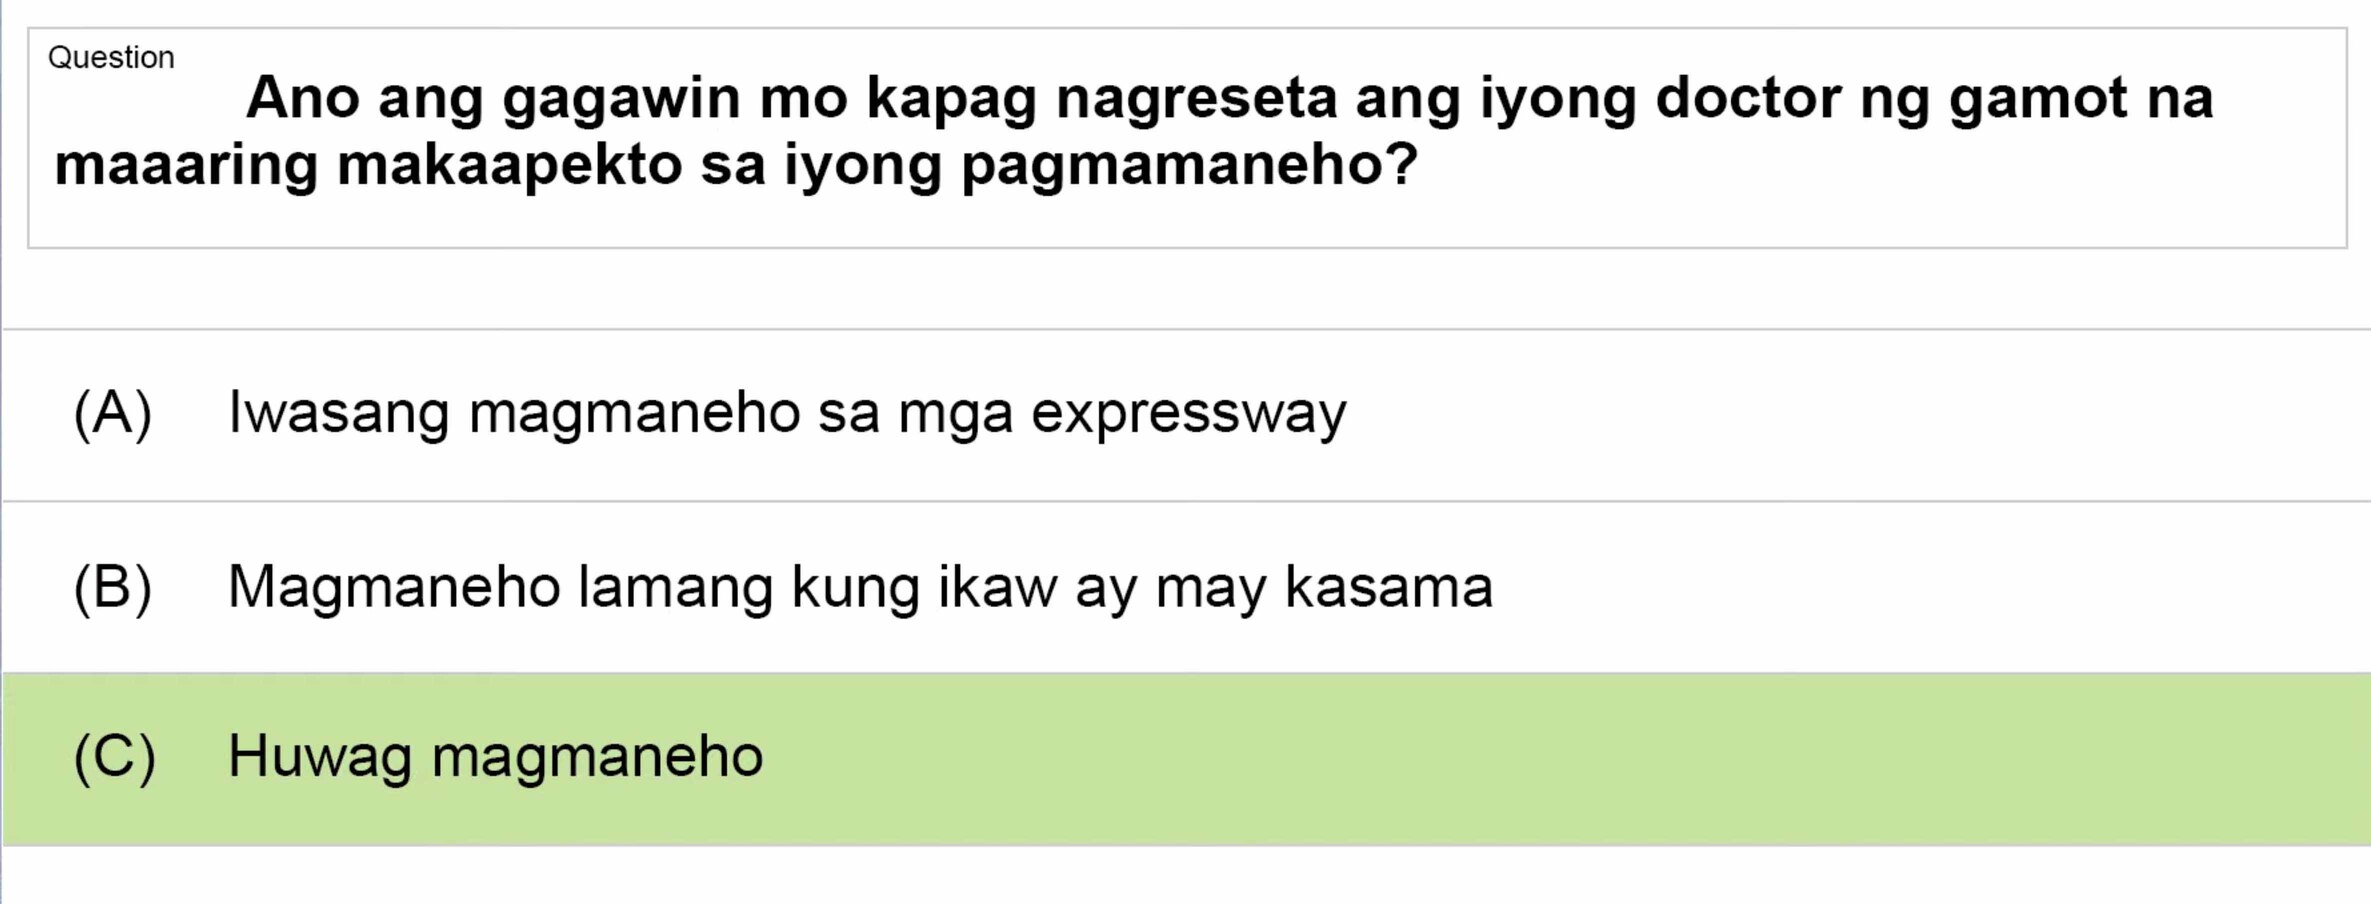 LTO Tagalog non professional exam reviewer light vehicle 3 (25)